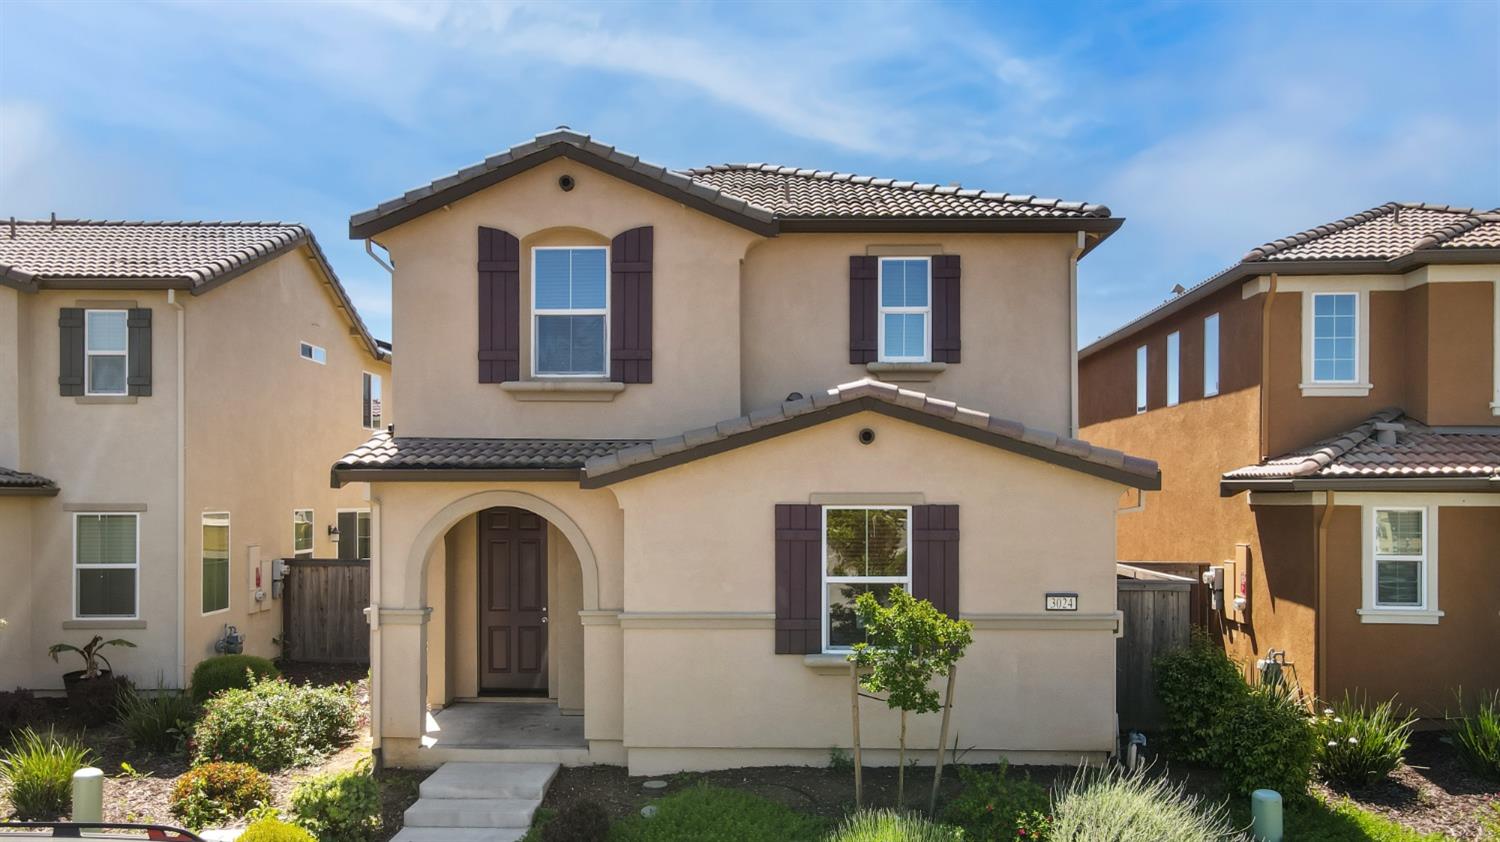 Here is a great opportunity for one lucky buyer to own this move-in ready home in Natomas! This home